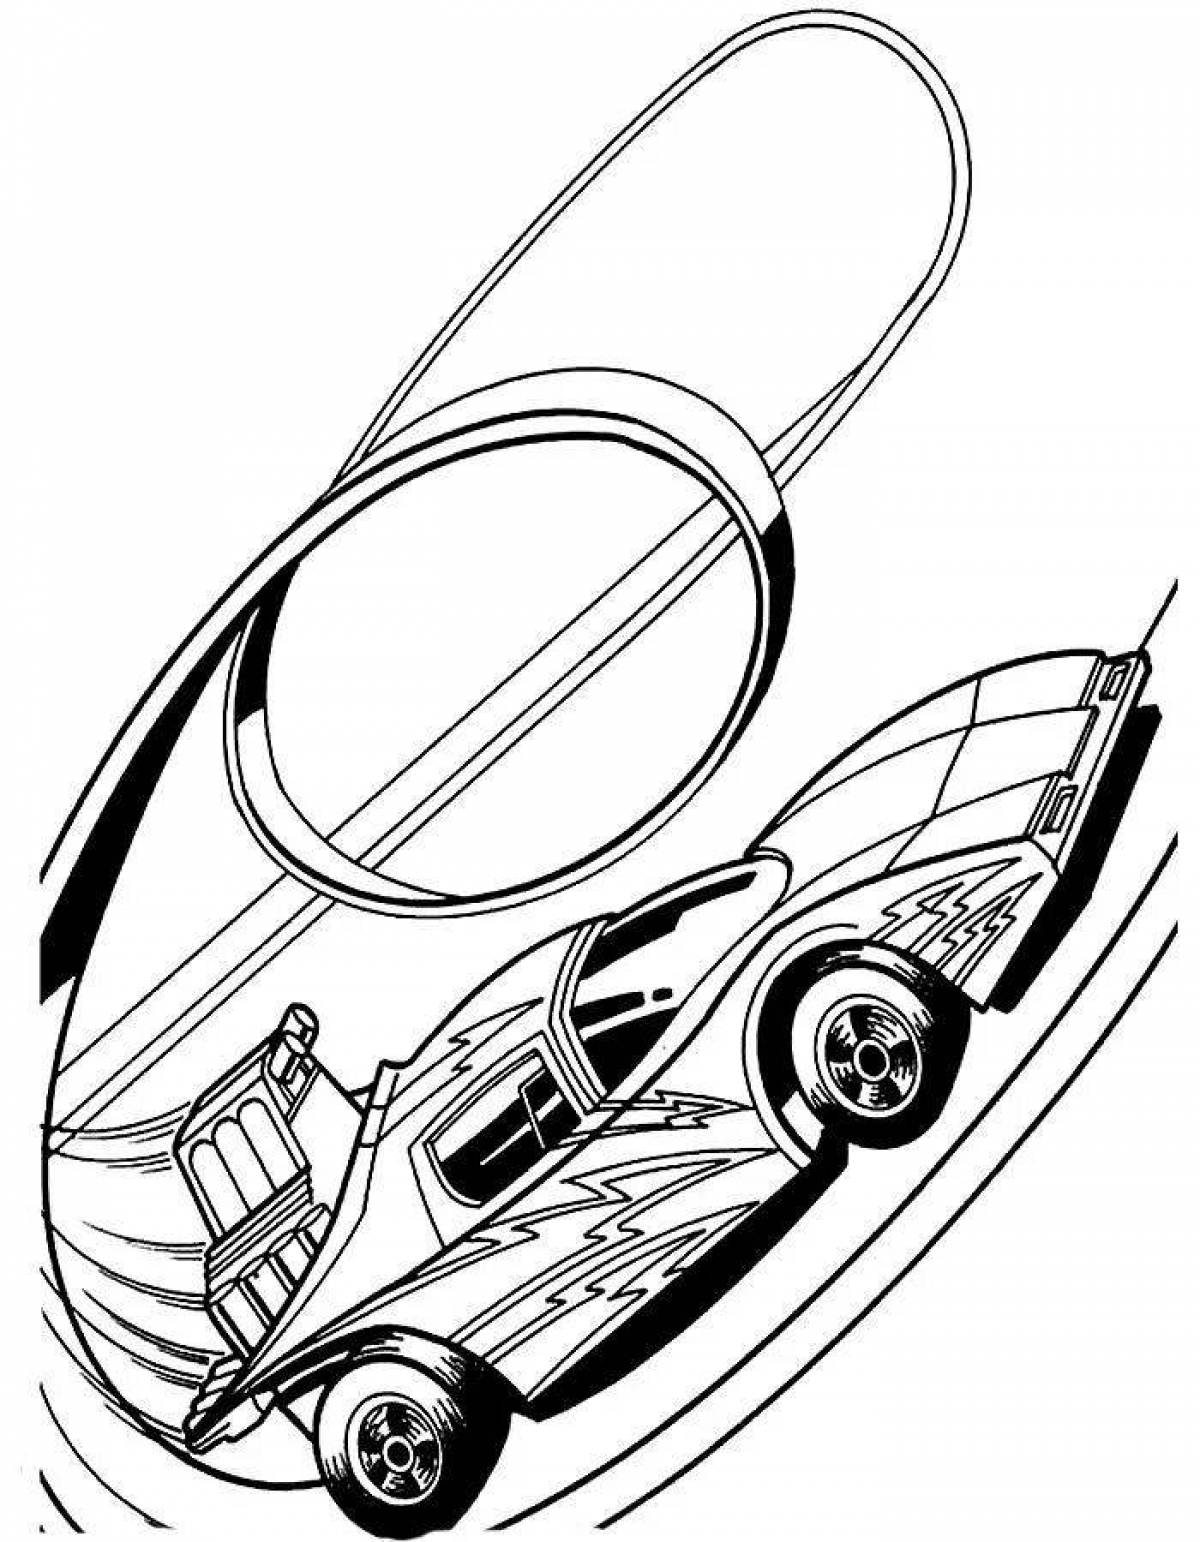 Coloring page gorgeous hot wheels car